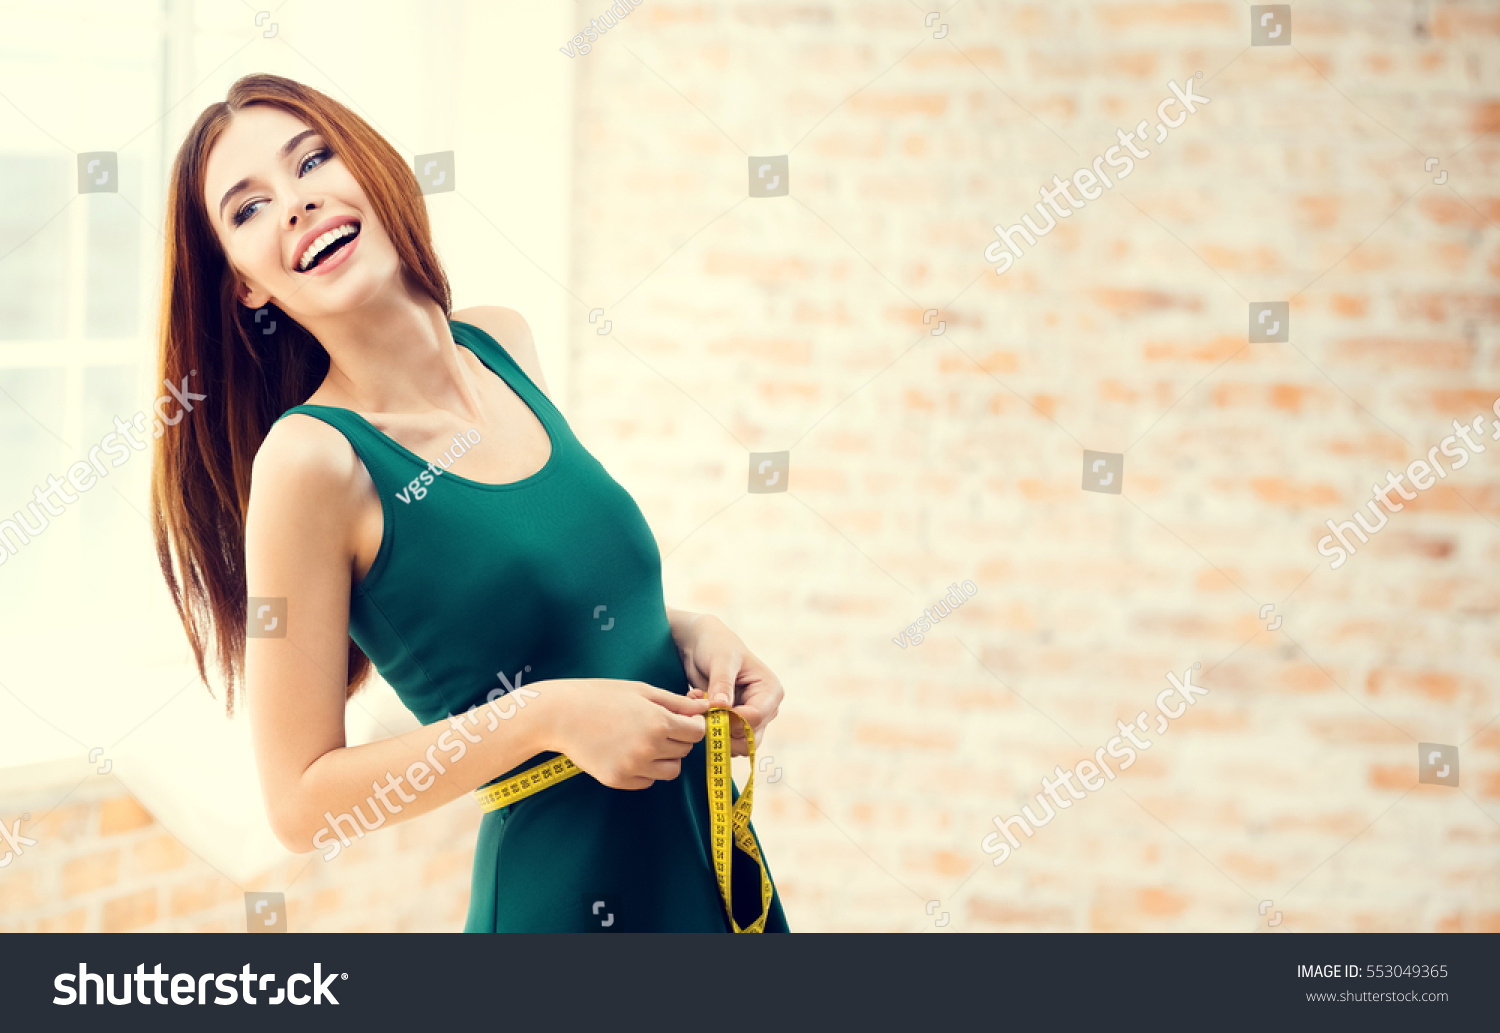 Young happy woman measuring her waist with a tape measure, at home, indoors. Caucasian model in healthy lifestyle, diet and  beauty concept shoot. Blank copyspace area for slogan or text message. #553049365